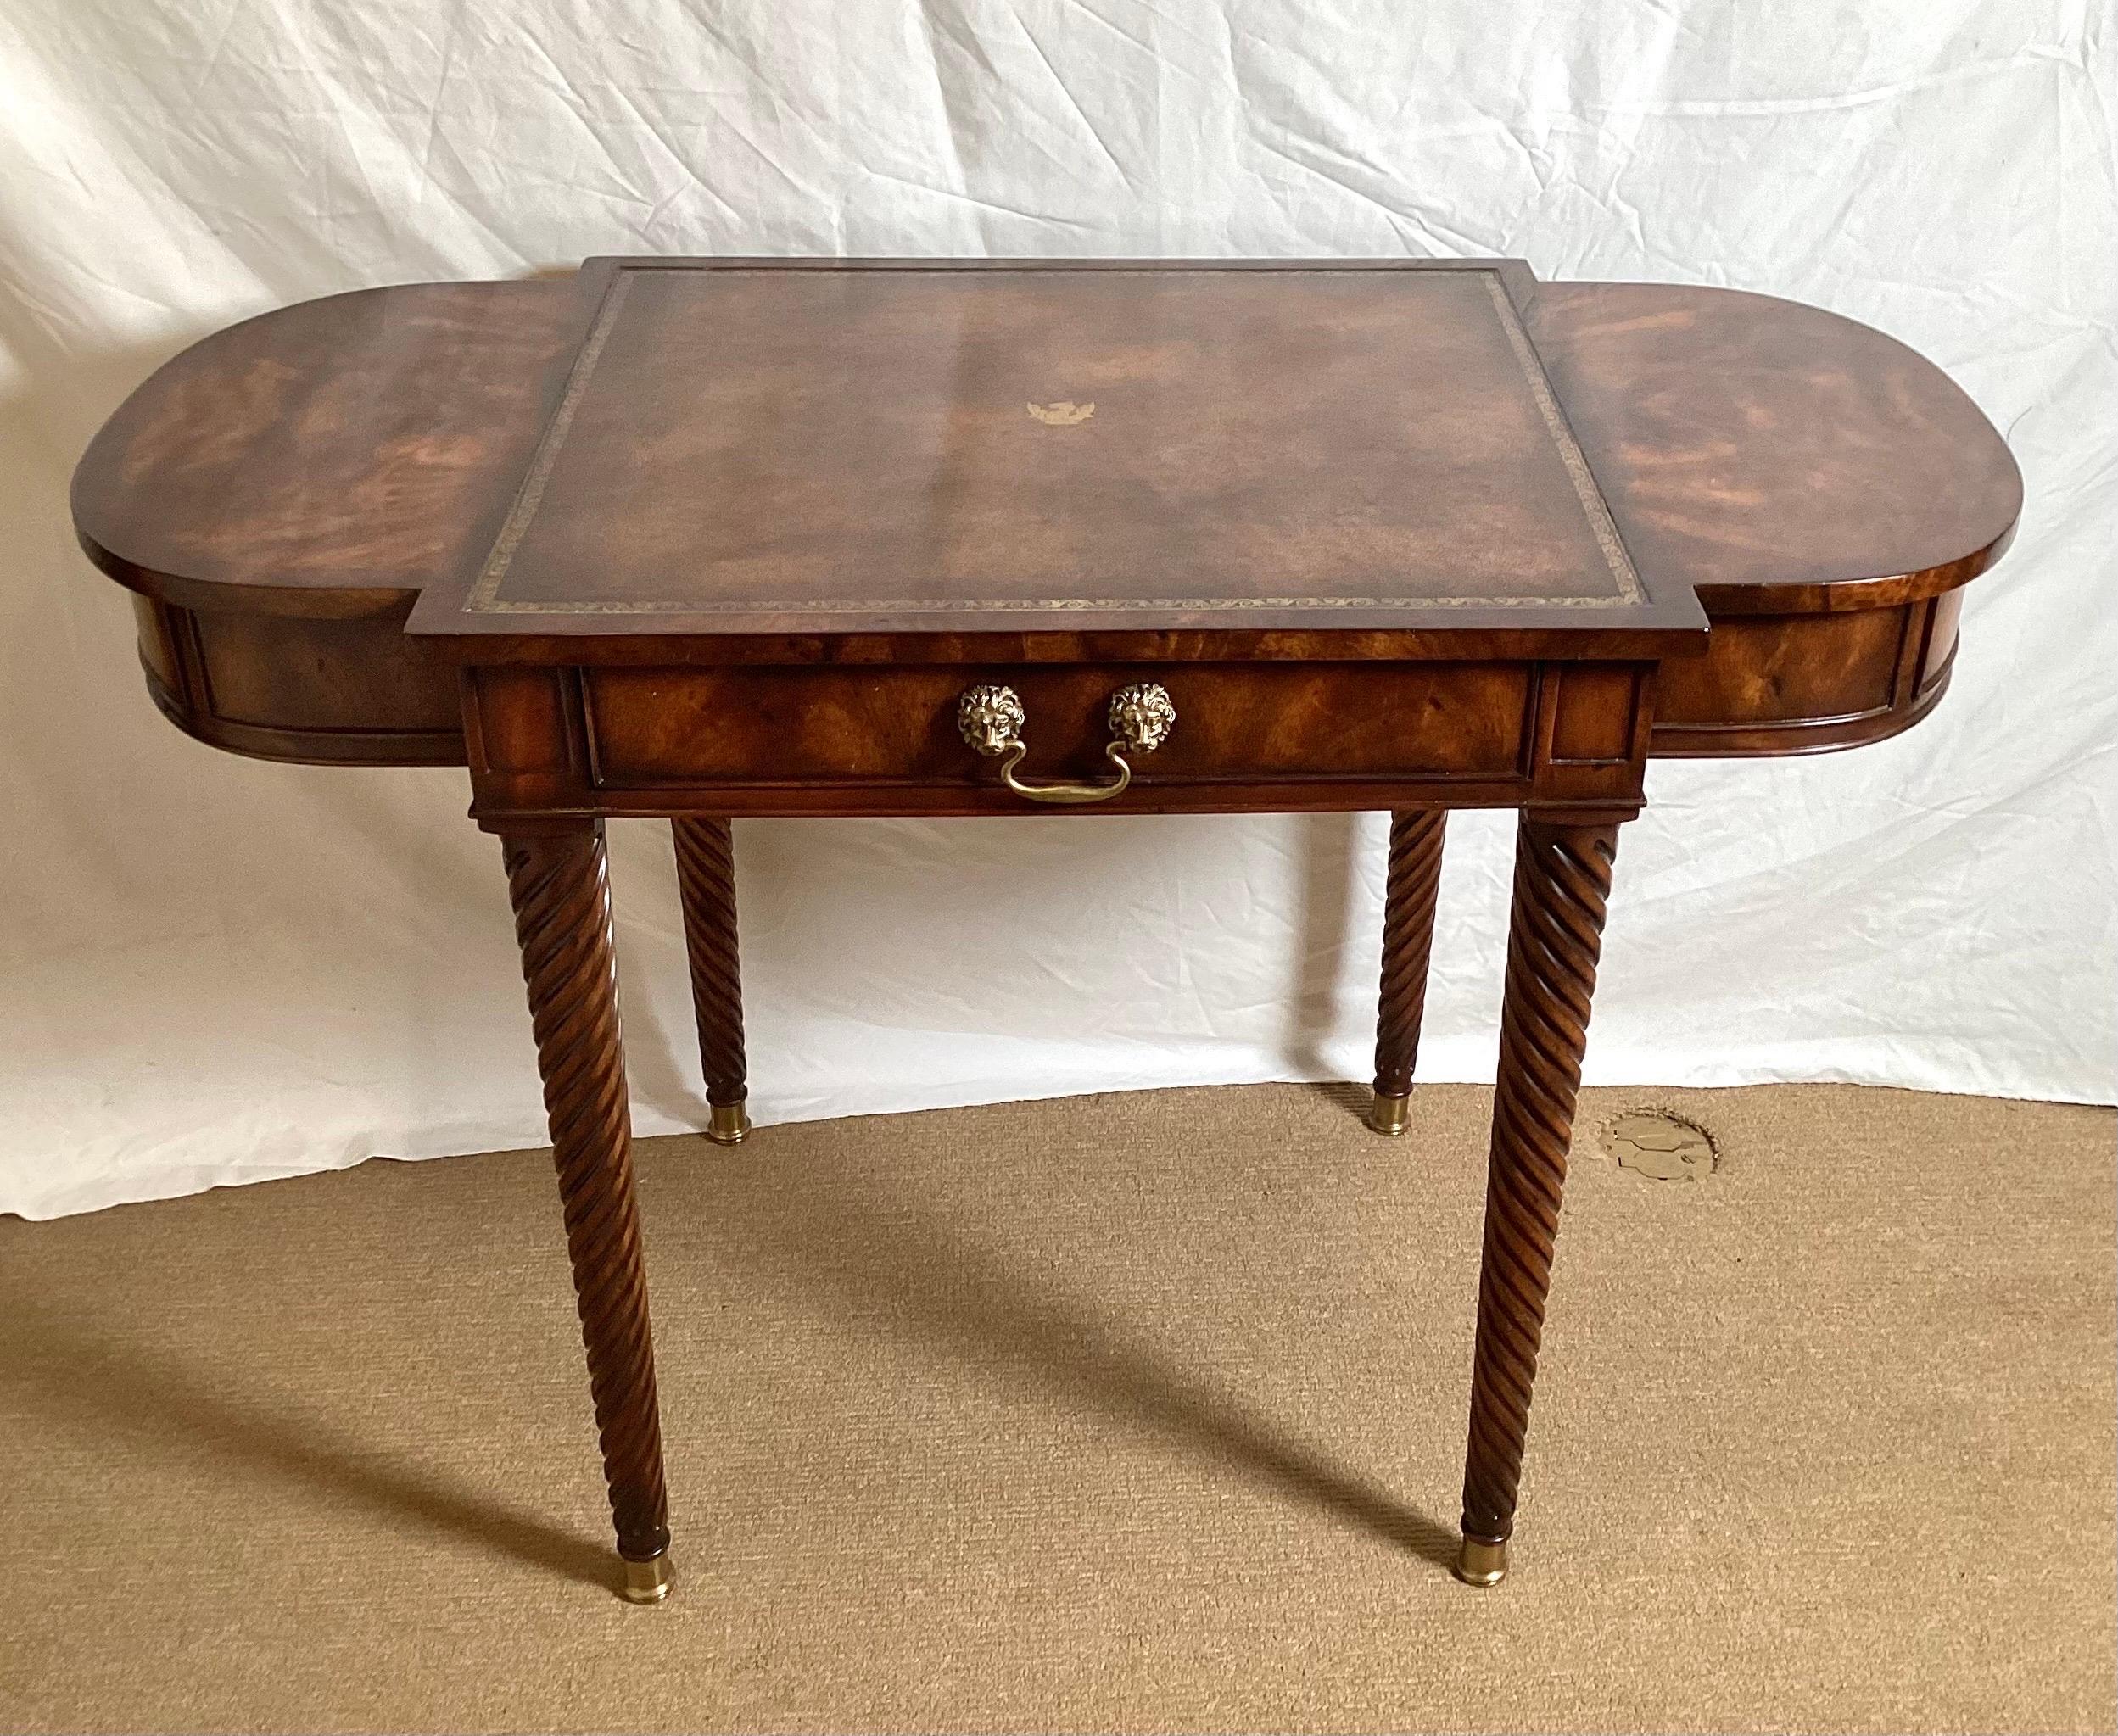 Elegant Theodore Alexander leather and walnut diminutive writing desk. The central drawer with two D shaped drawers one on each side, the top with a Tabaco tooled leather top, resting on four spiral turned legs.